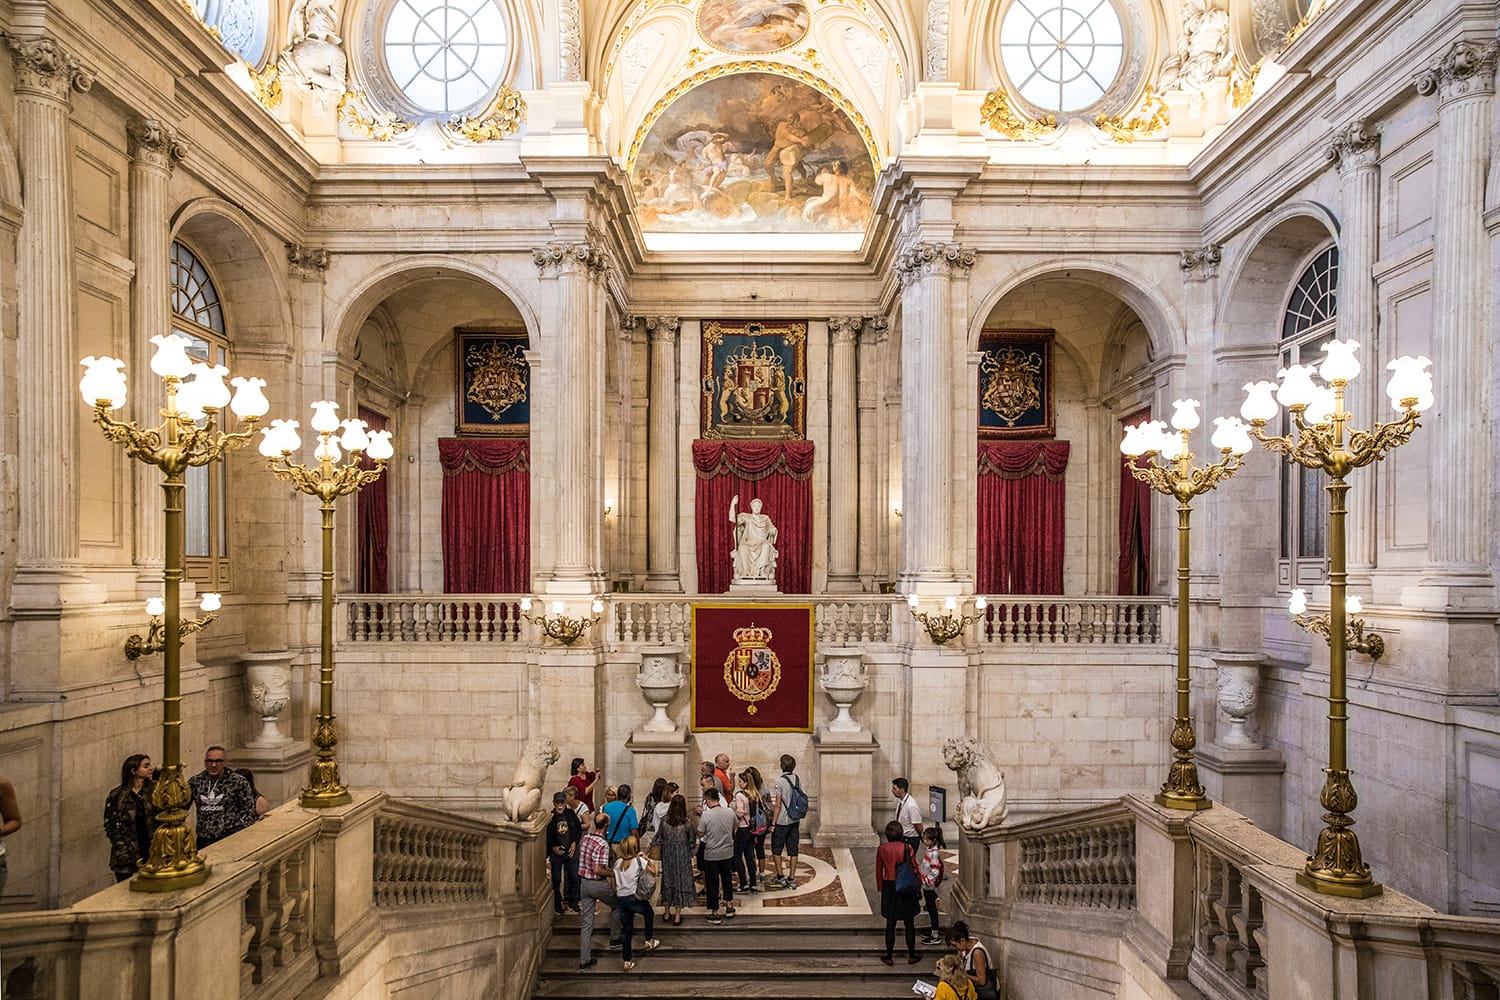 Staircase in the Royal Palace in Madrid, Spain